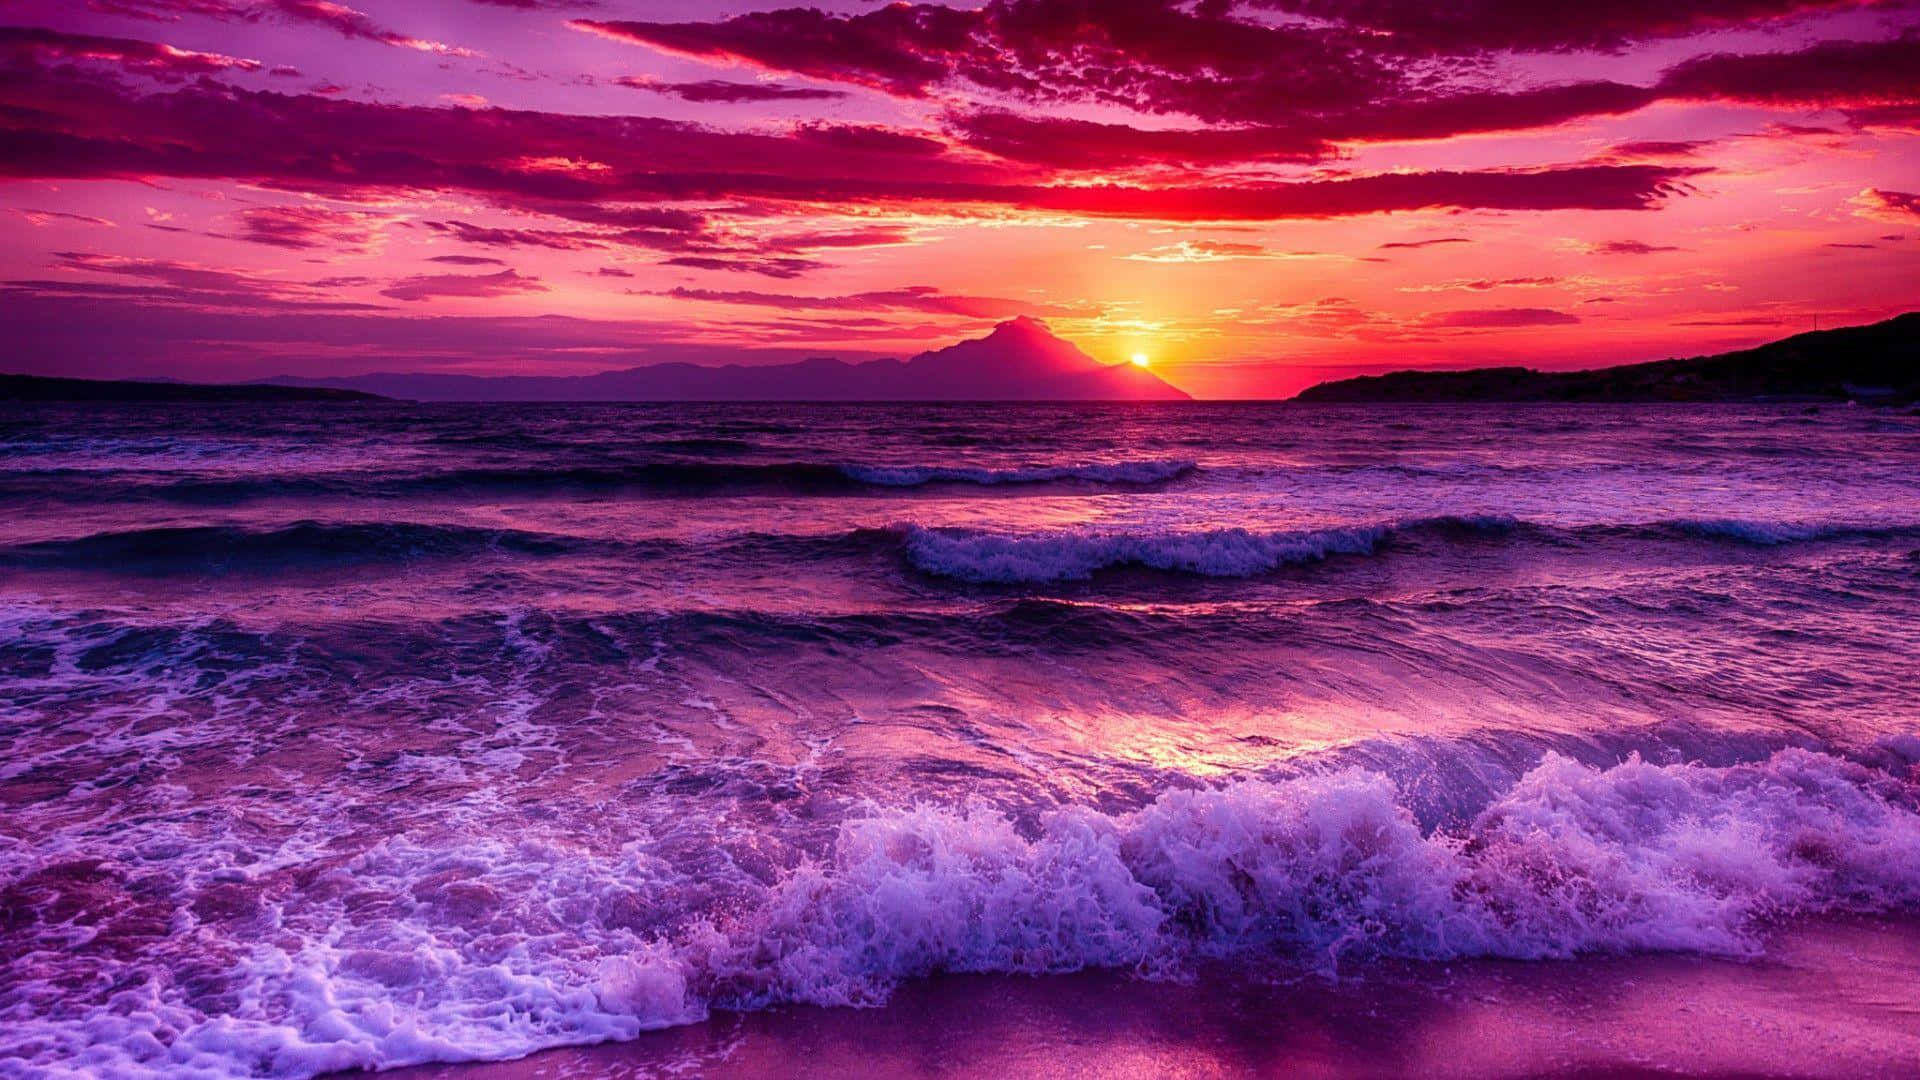 'Experience the quiet beauty of a blue and purple sunset’ Wallpaper